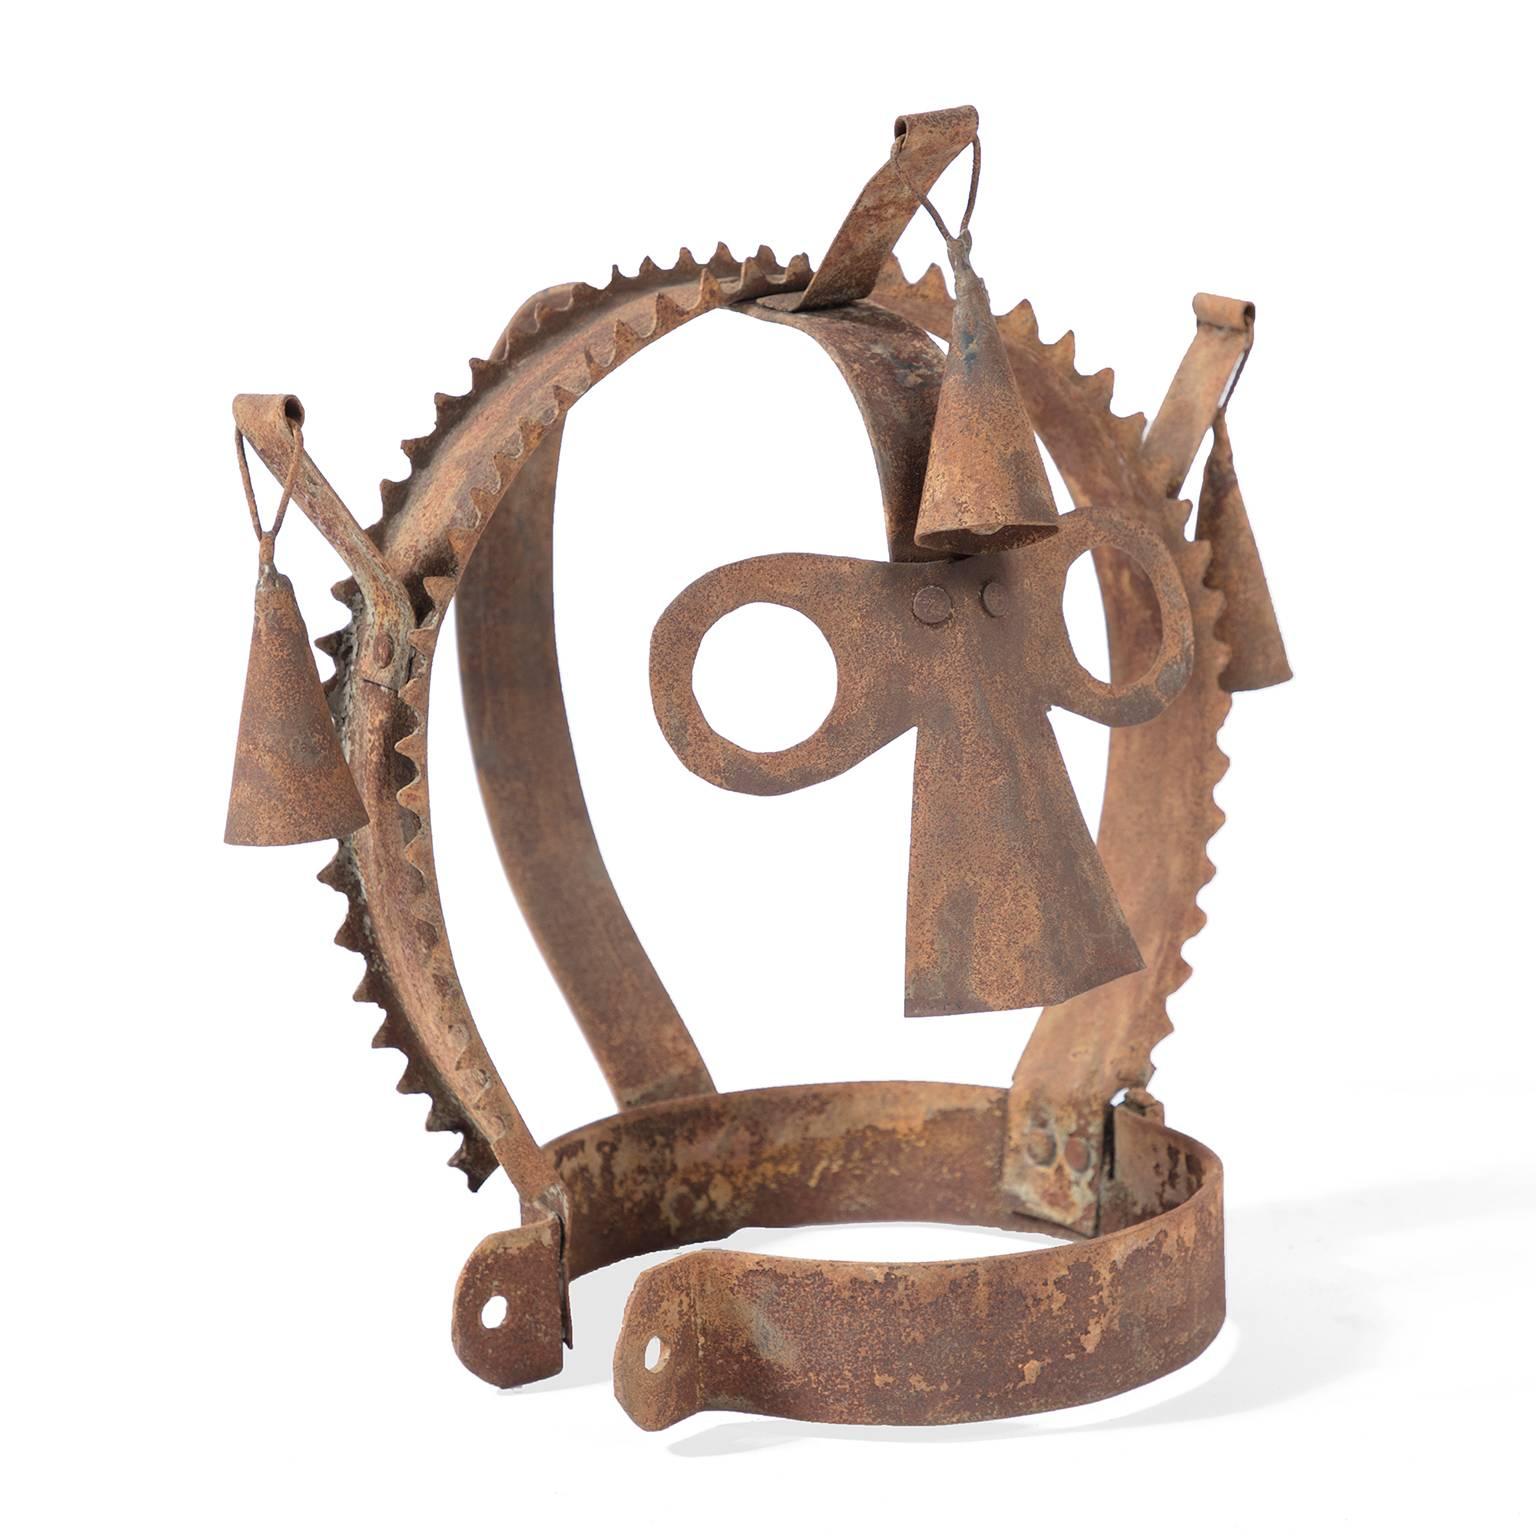 Also known as a scold’s bridle or witch’s bridle, helmets like these were used in Scotland, England and Wales from the 16th through the 18th centuries. The armature has a flattened nose, round eyes, and three bells, with a metal collar.